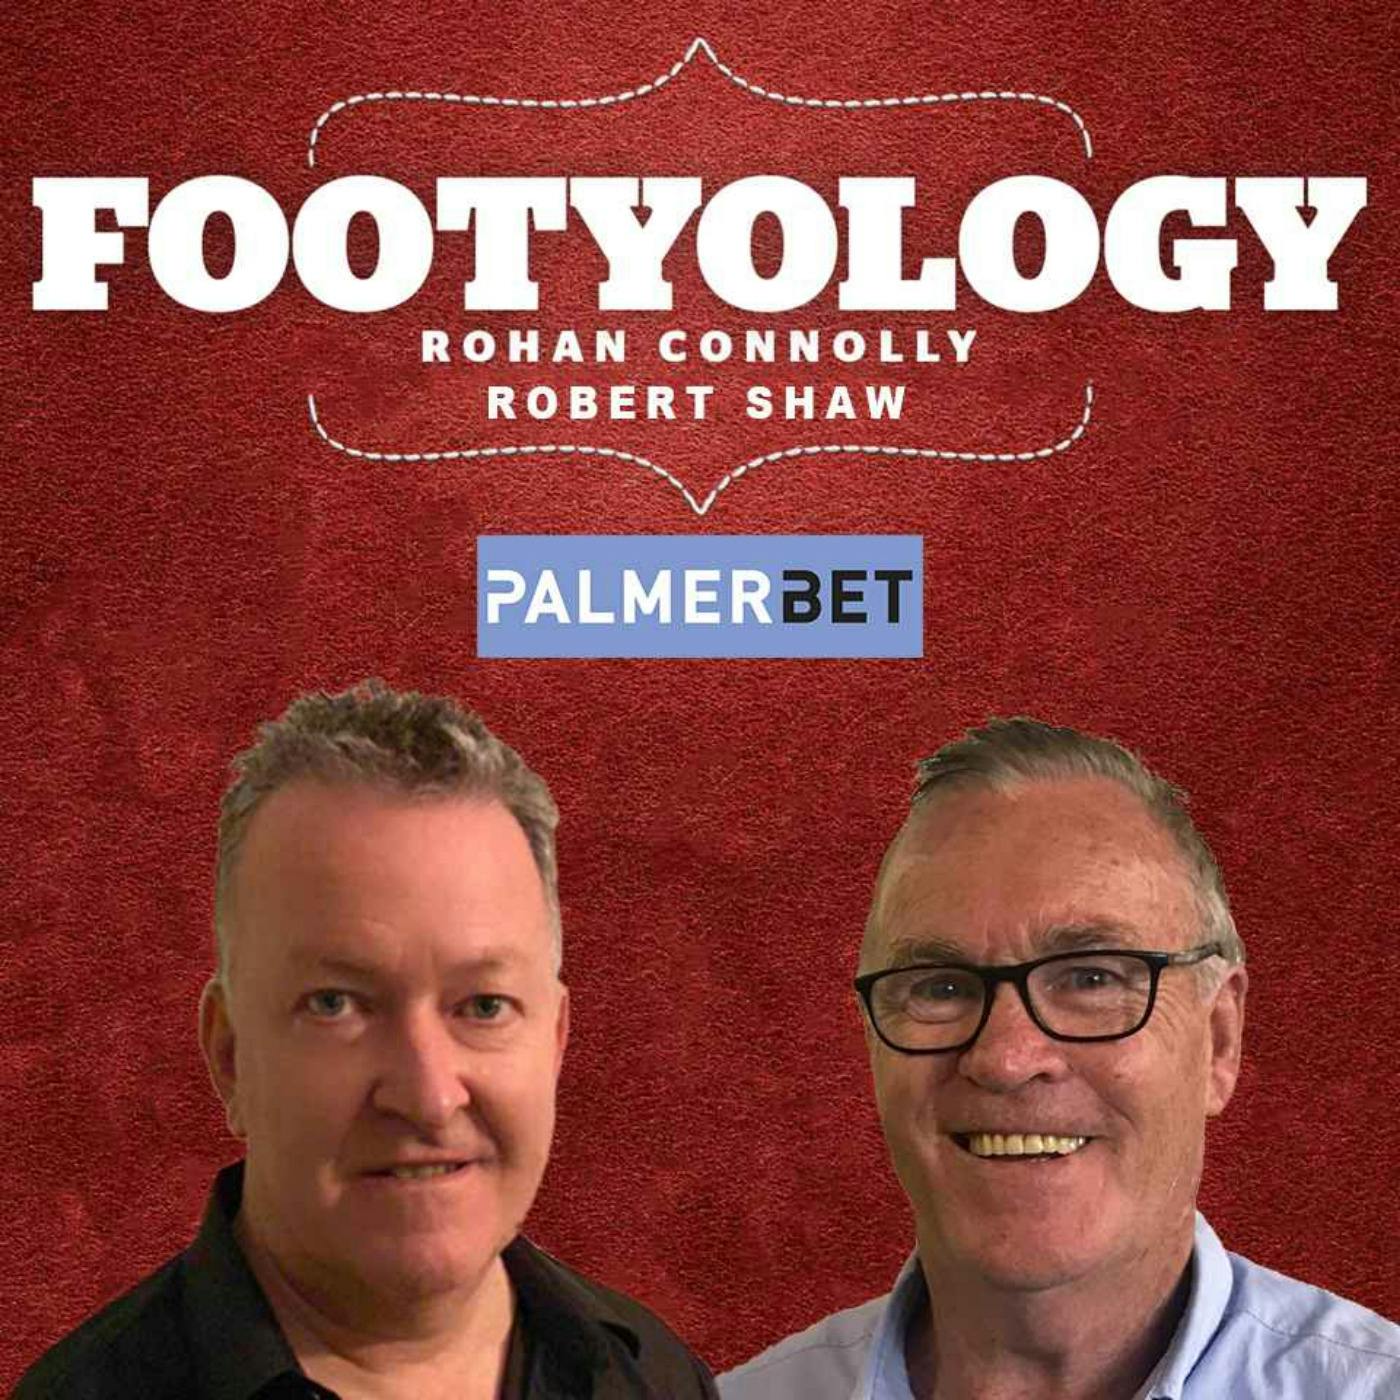 Footyology Podcast - August 10th 2022